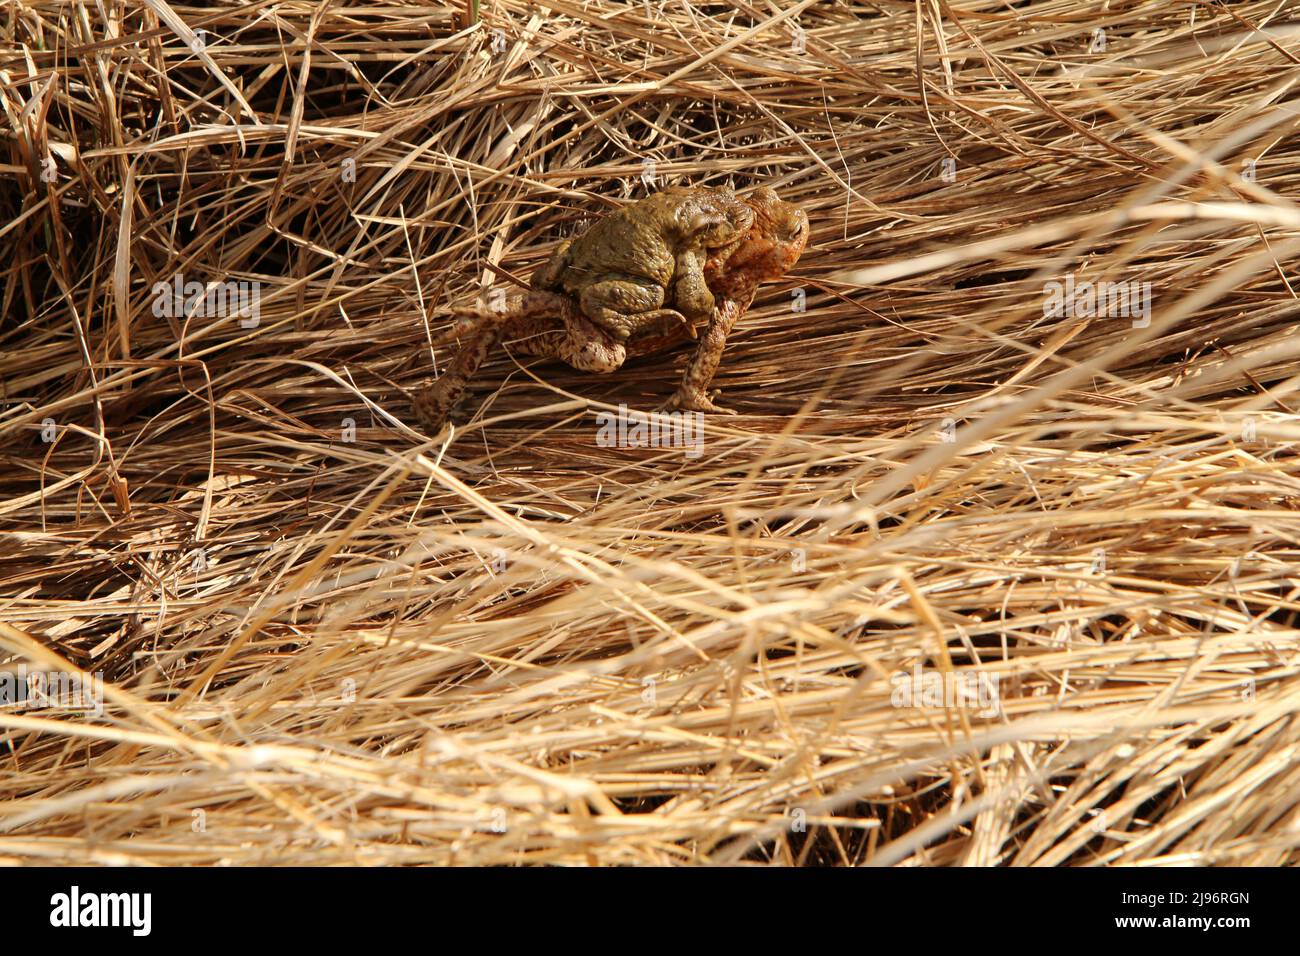 The detail of two toads hidden in the grass during the rutting season. Mating right now. Stock Photo